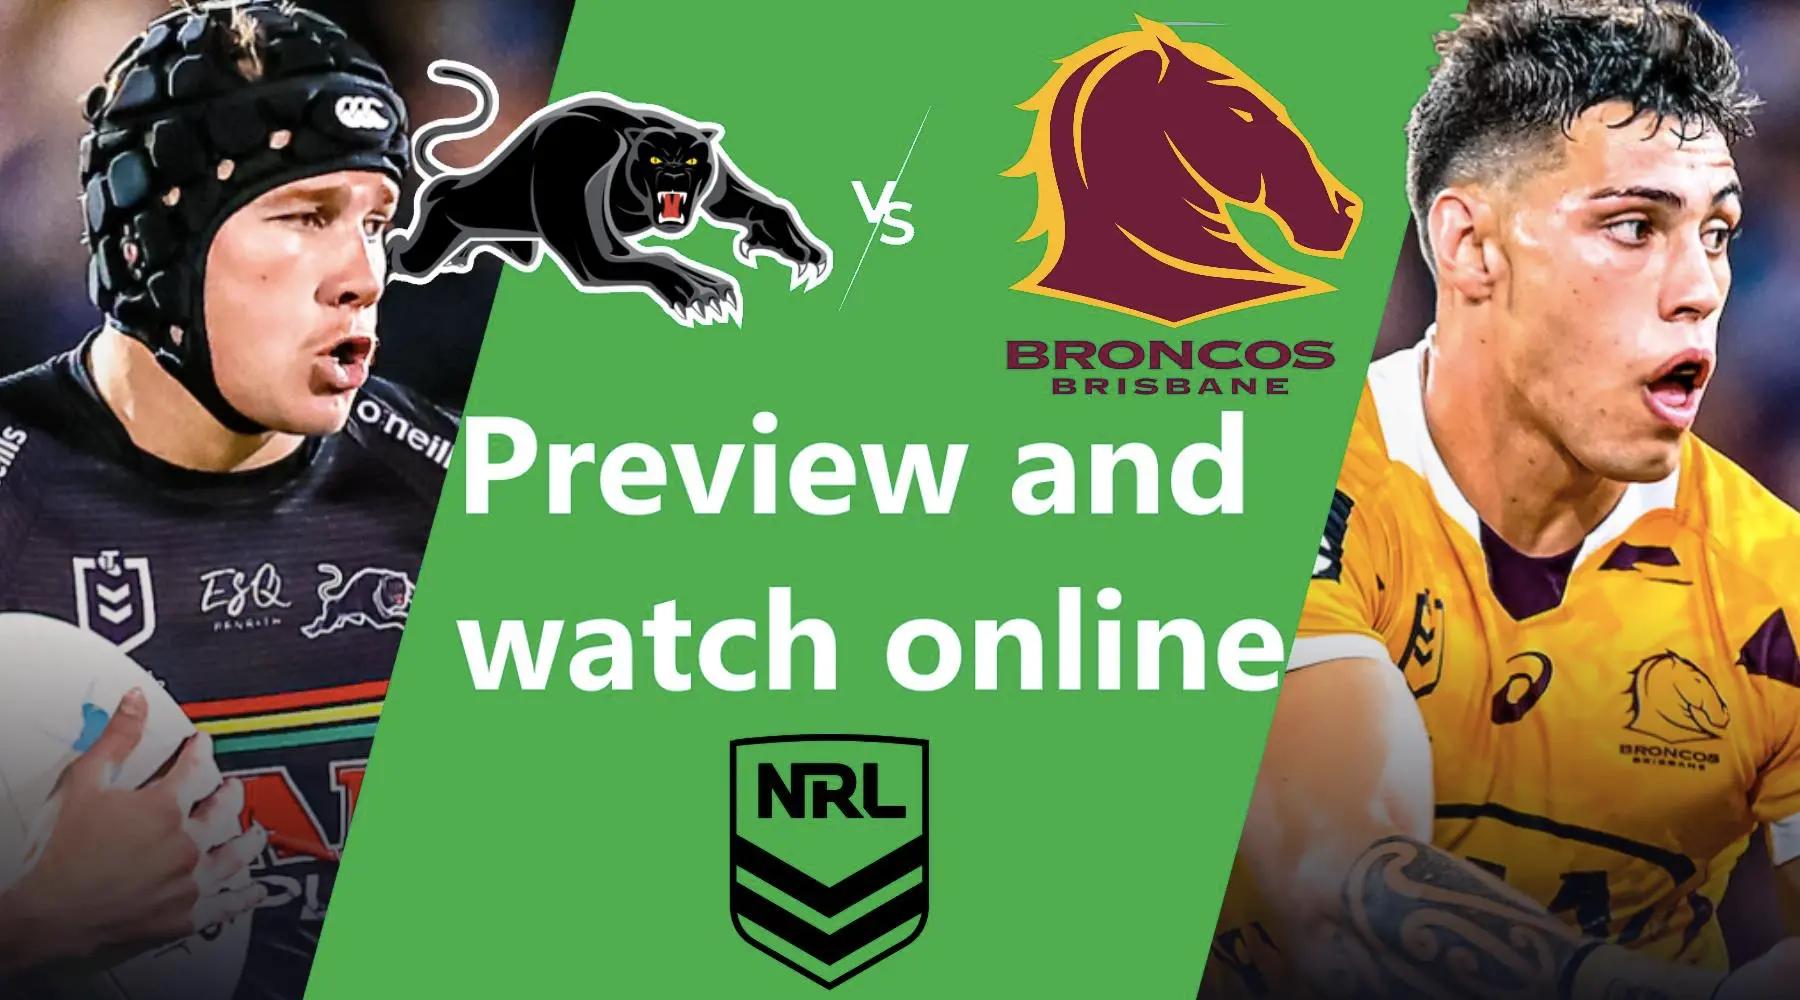 How to watch Panthers vs Broncos NRL live and match preview